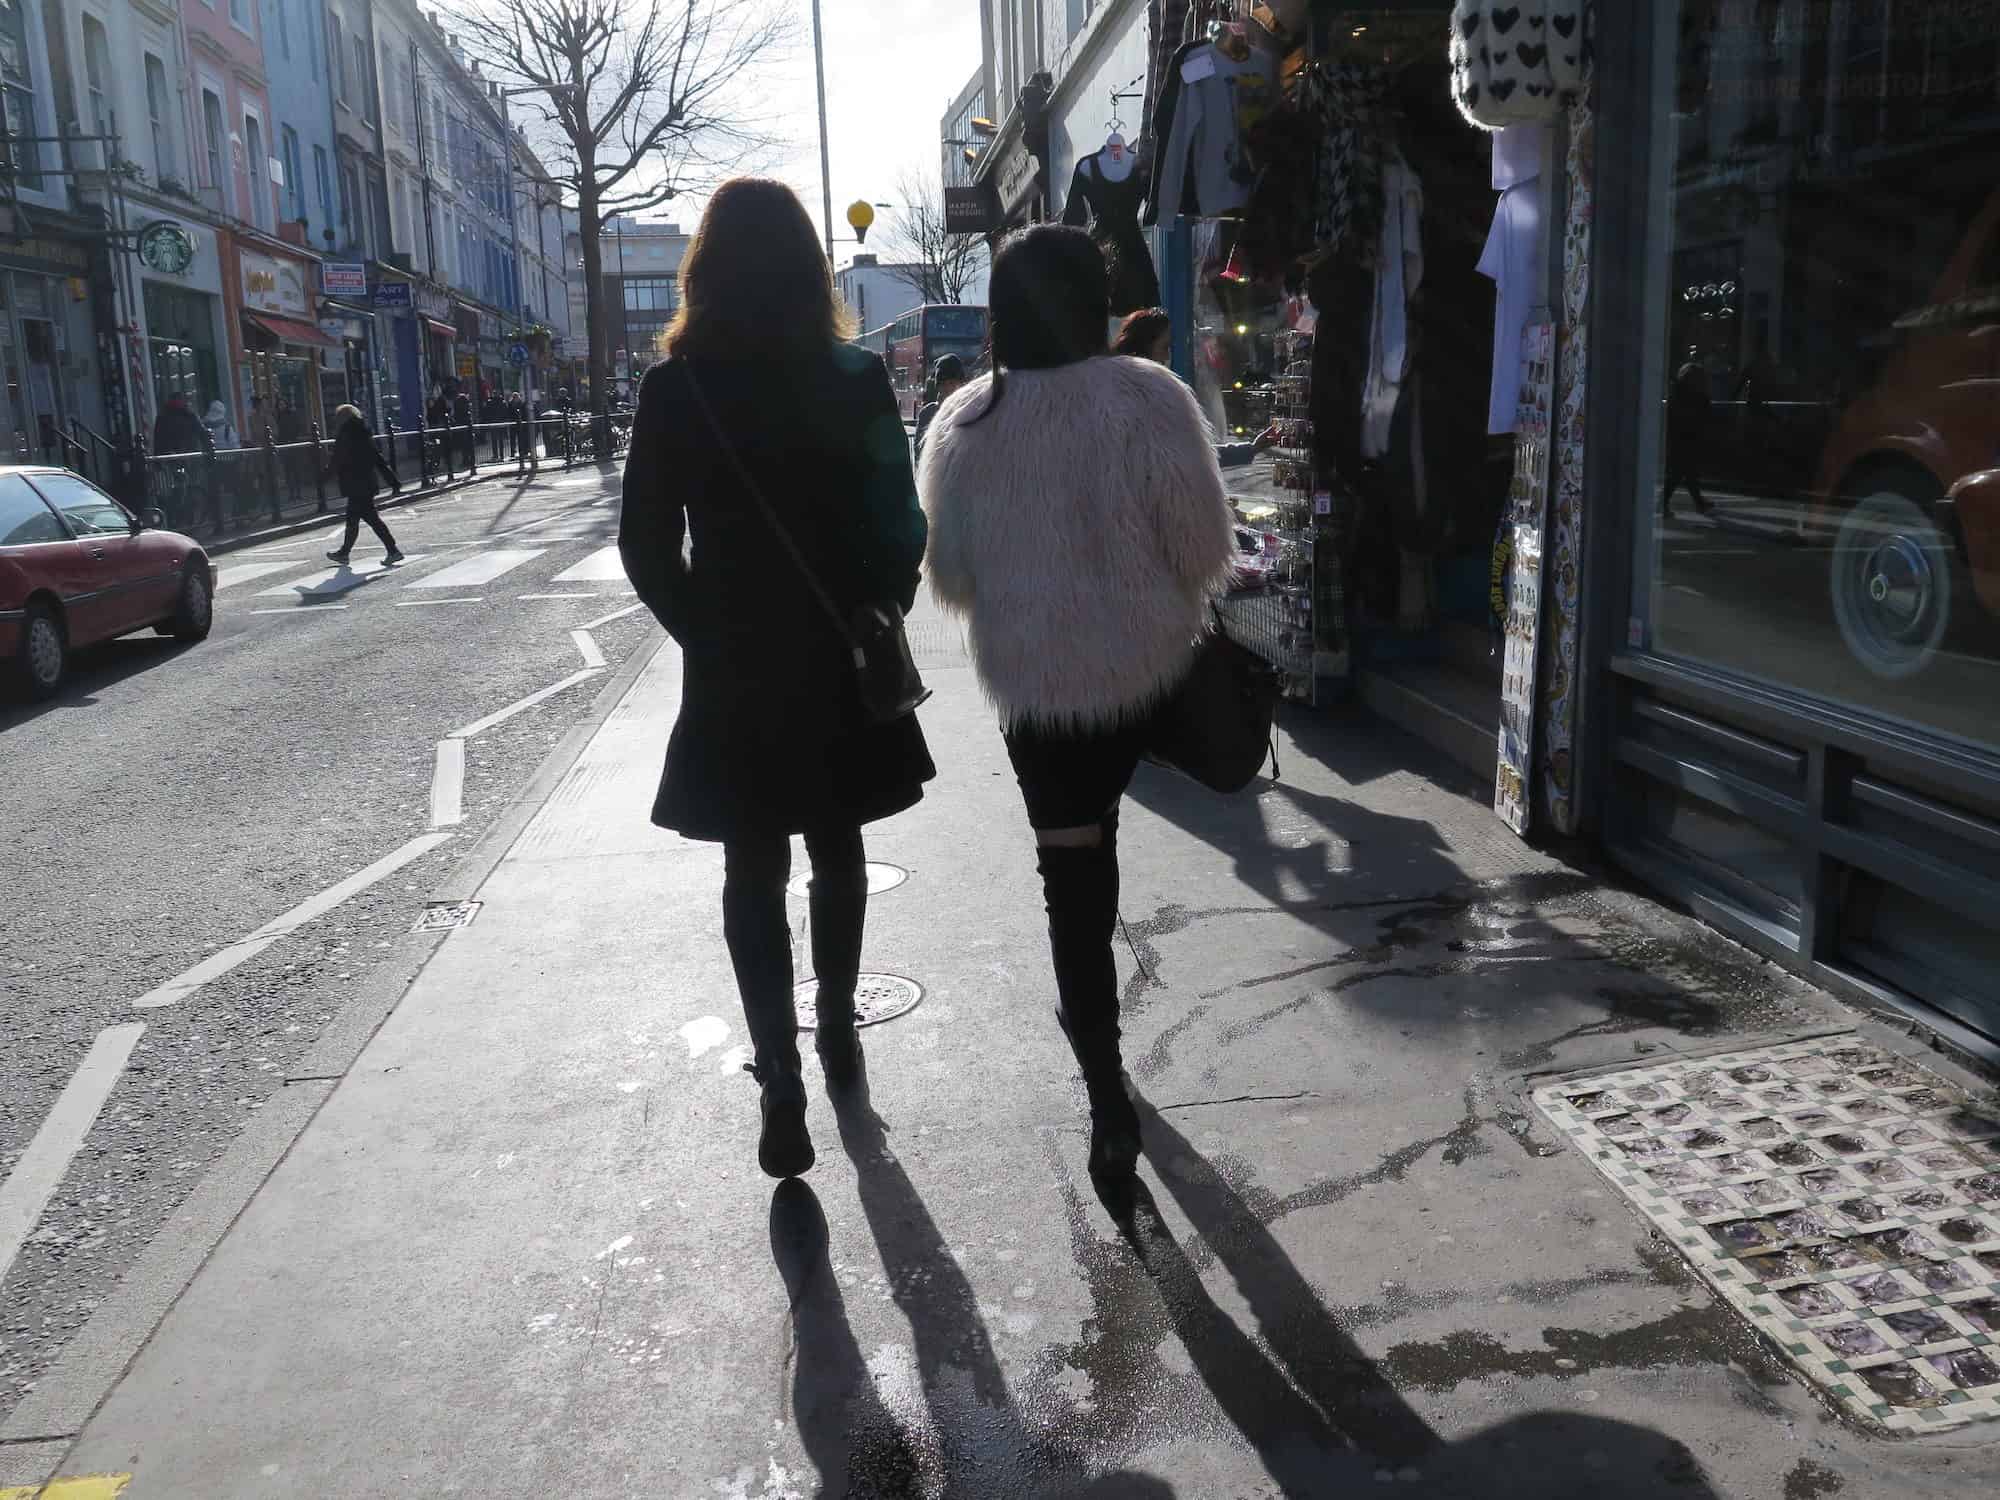 Two girls walking along a street in the London sunshine, one of them wears a fluffy pink jacket.